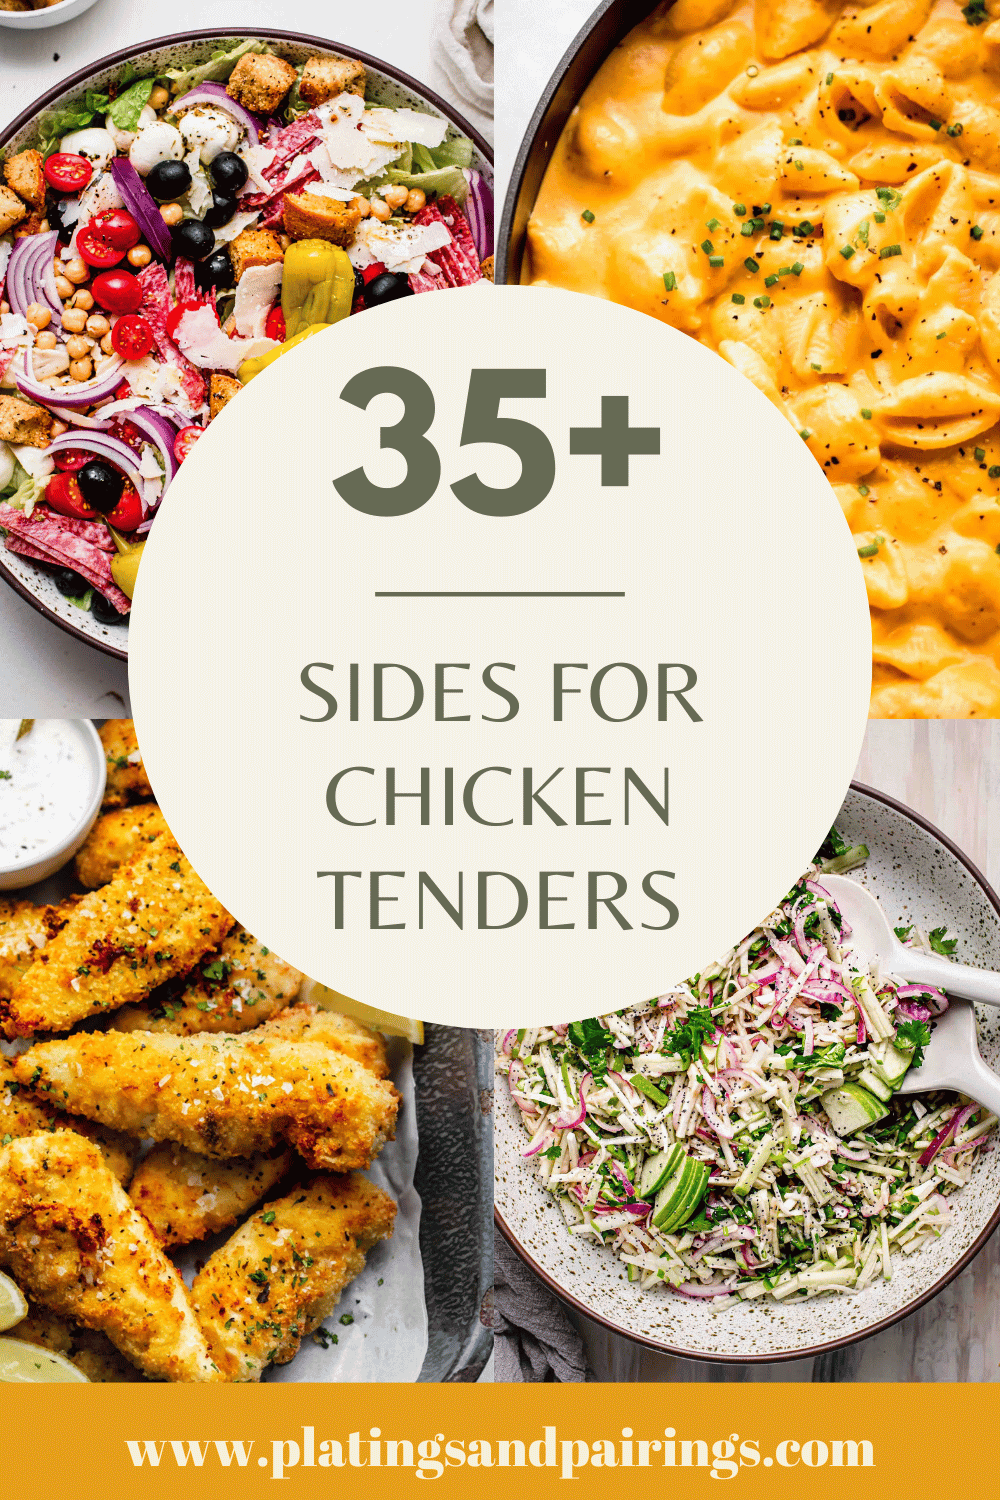 Collage of sides for chicken tenders with text overlay.